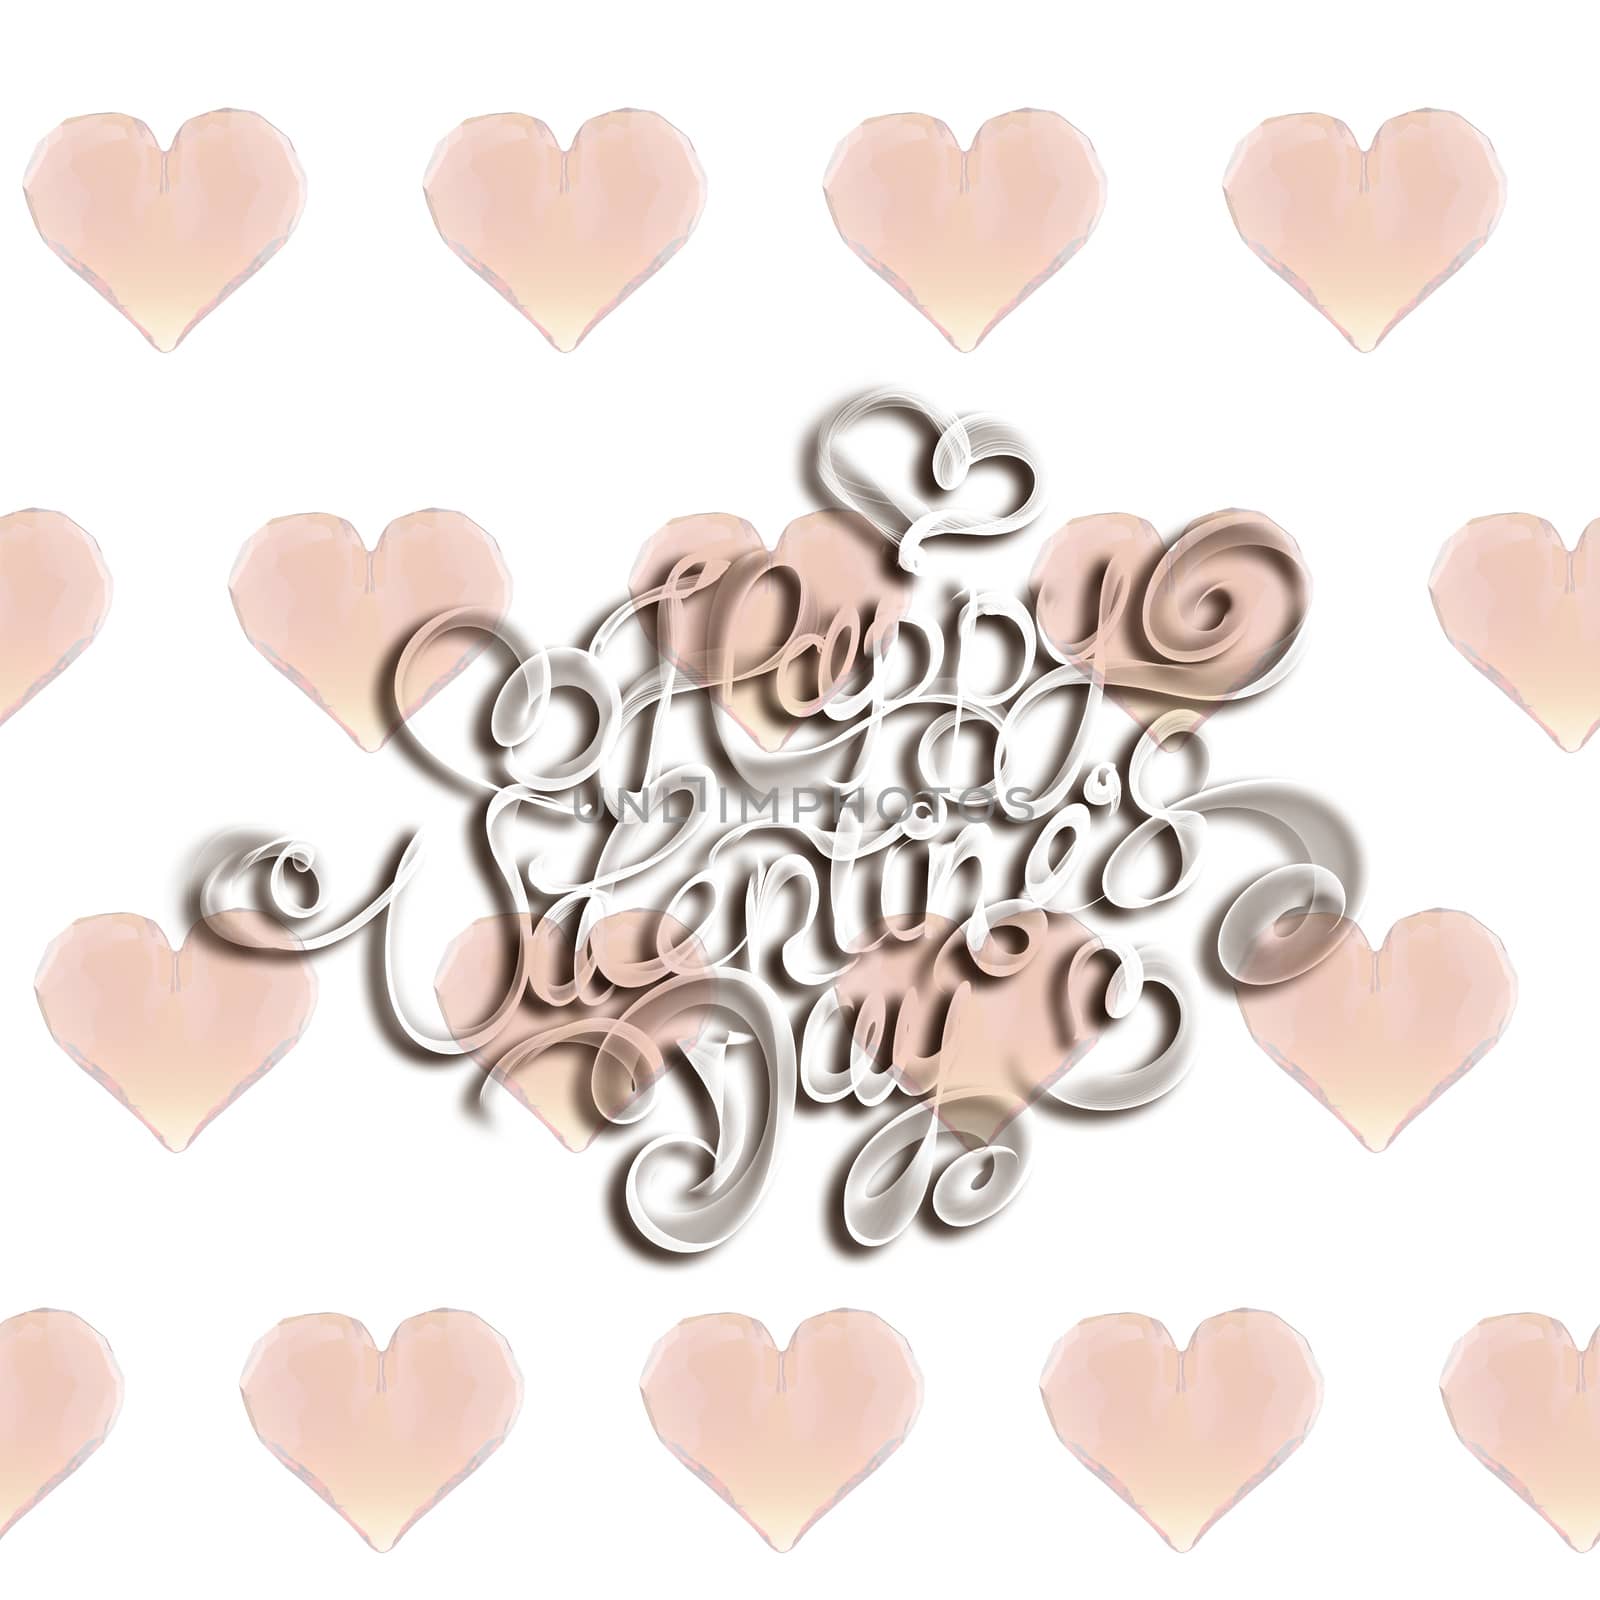 Happy Valentines day vintage lettering written by fire or smoke over bright seamless background full of flying hearts. 3d illustration.